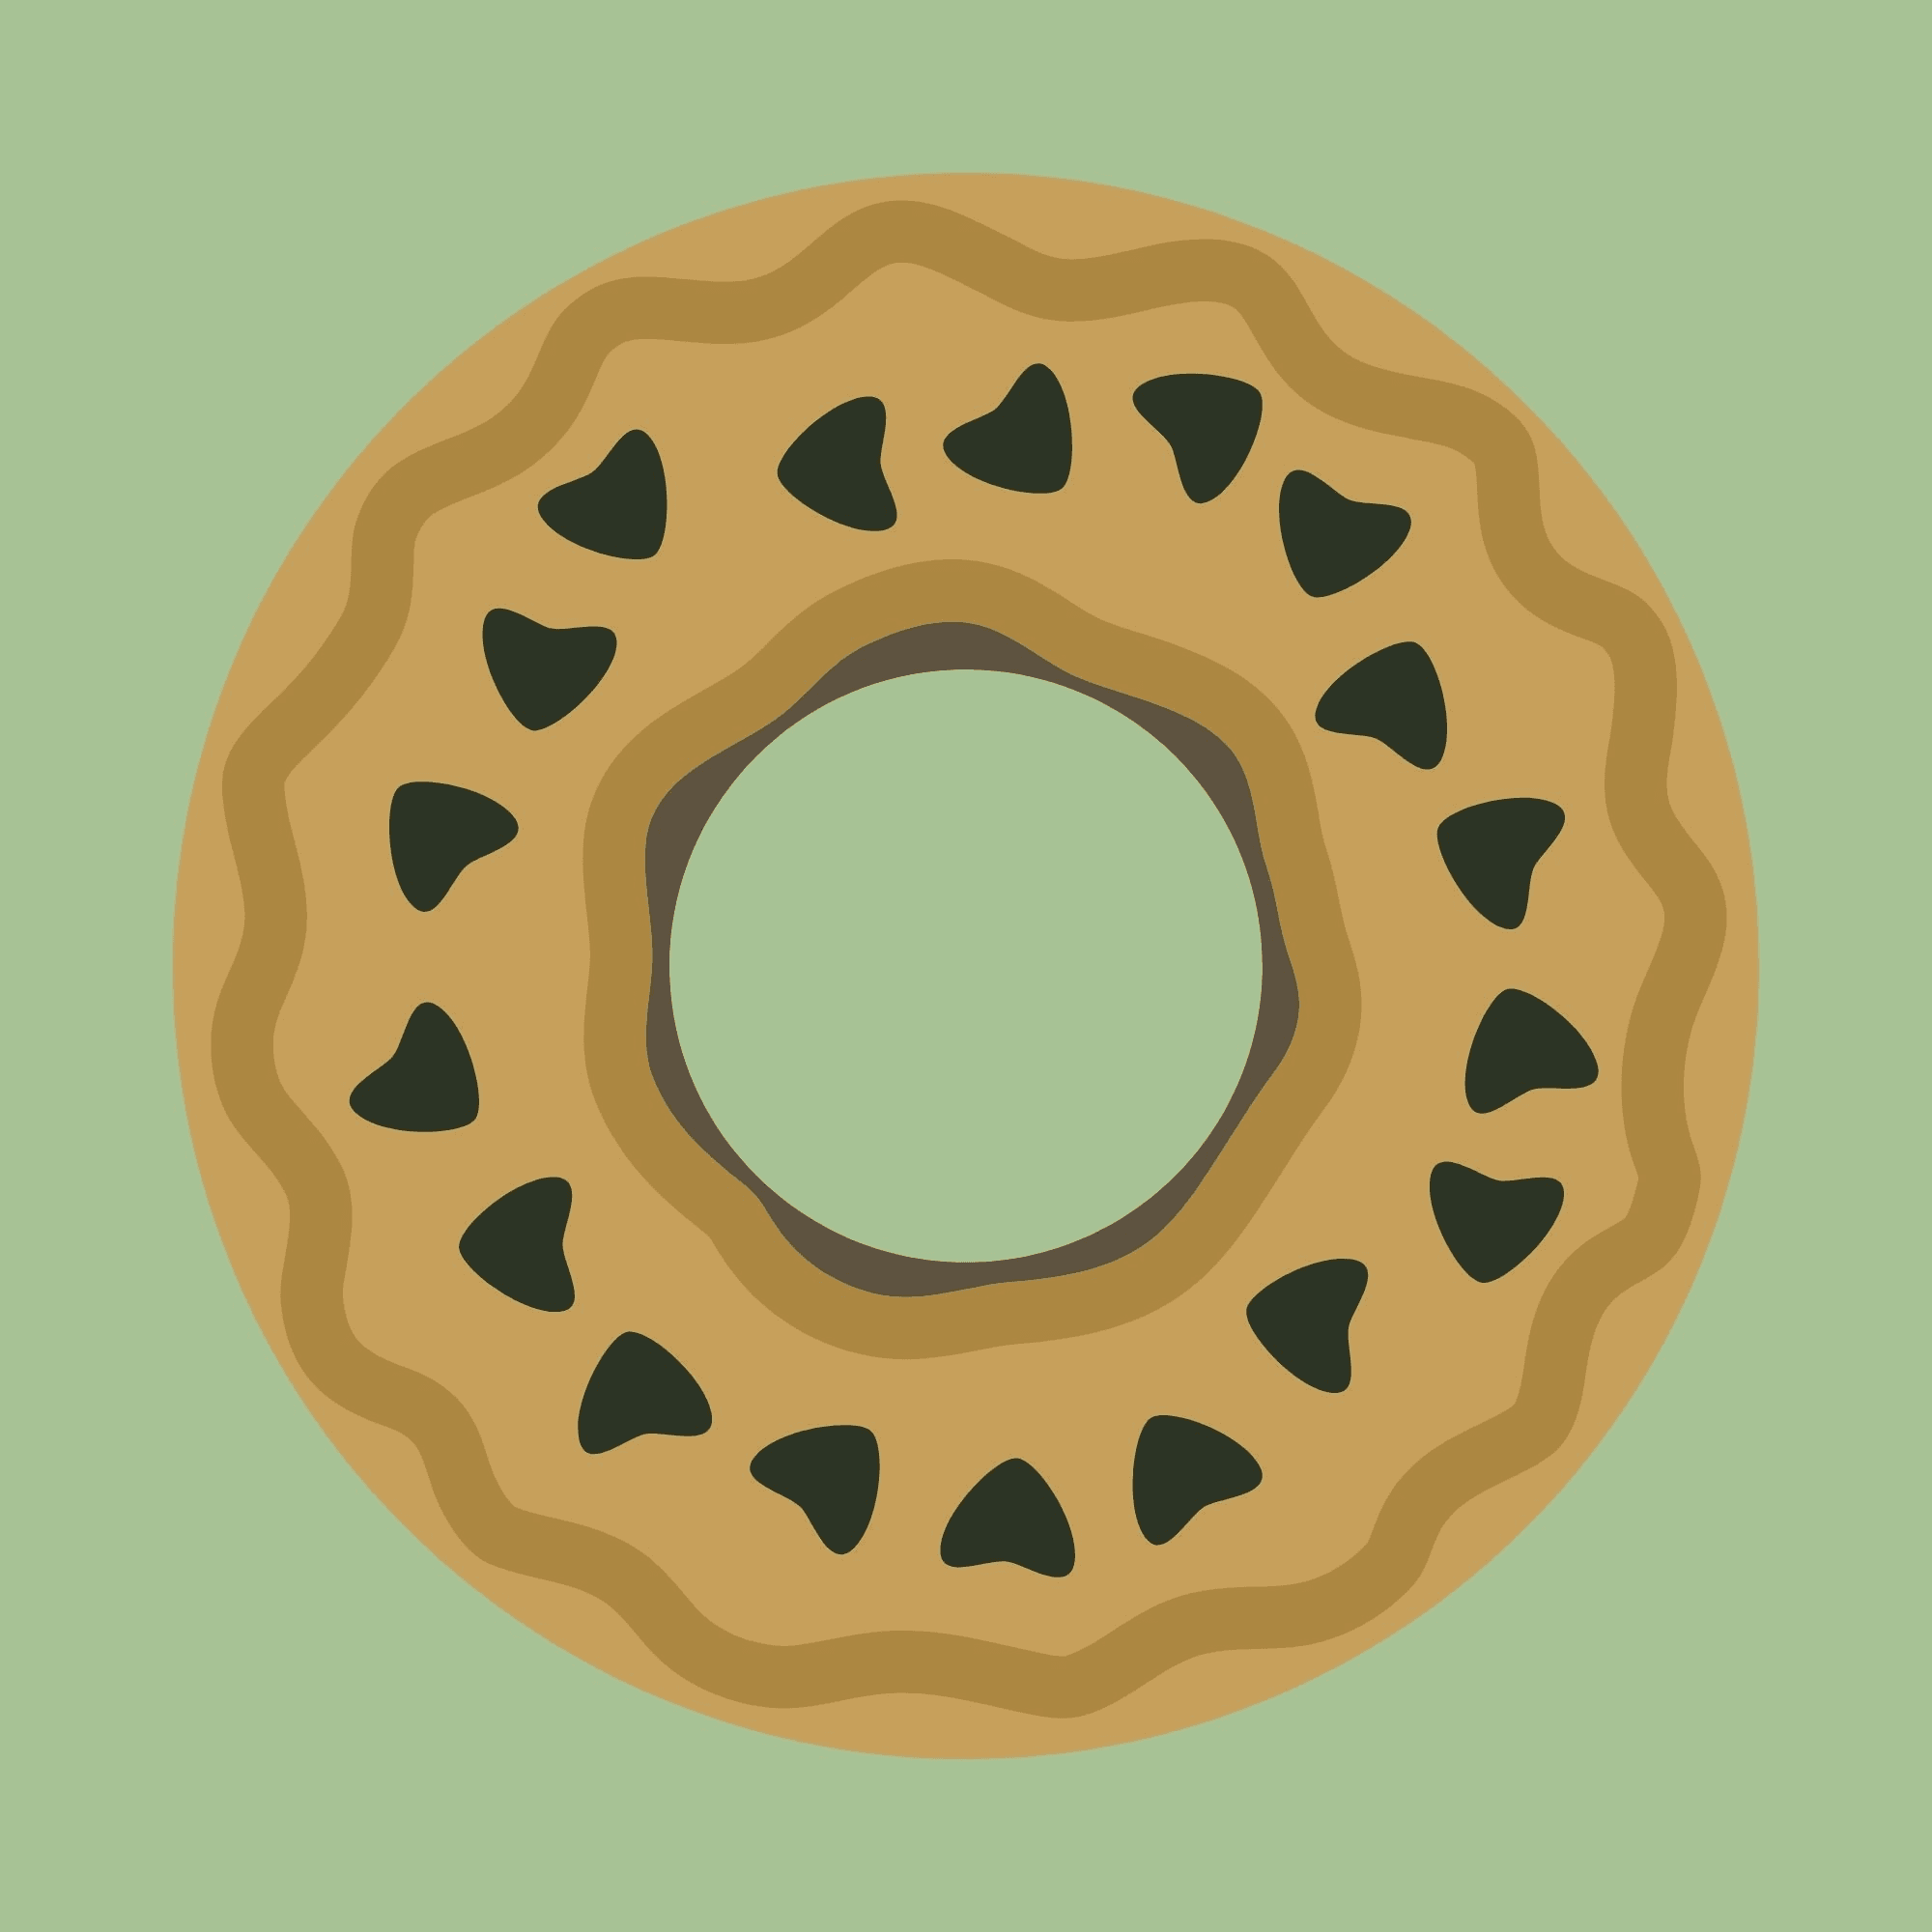 Donut #42 - Poly Donuts | OpenSea